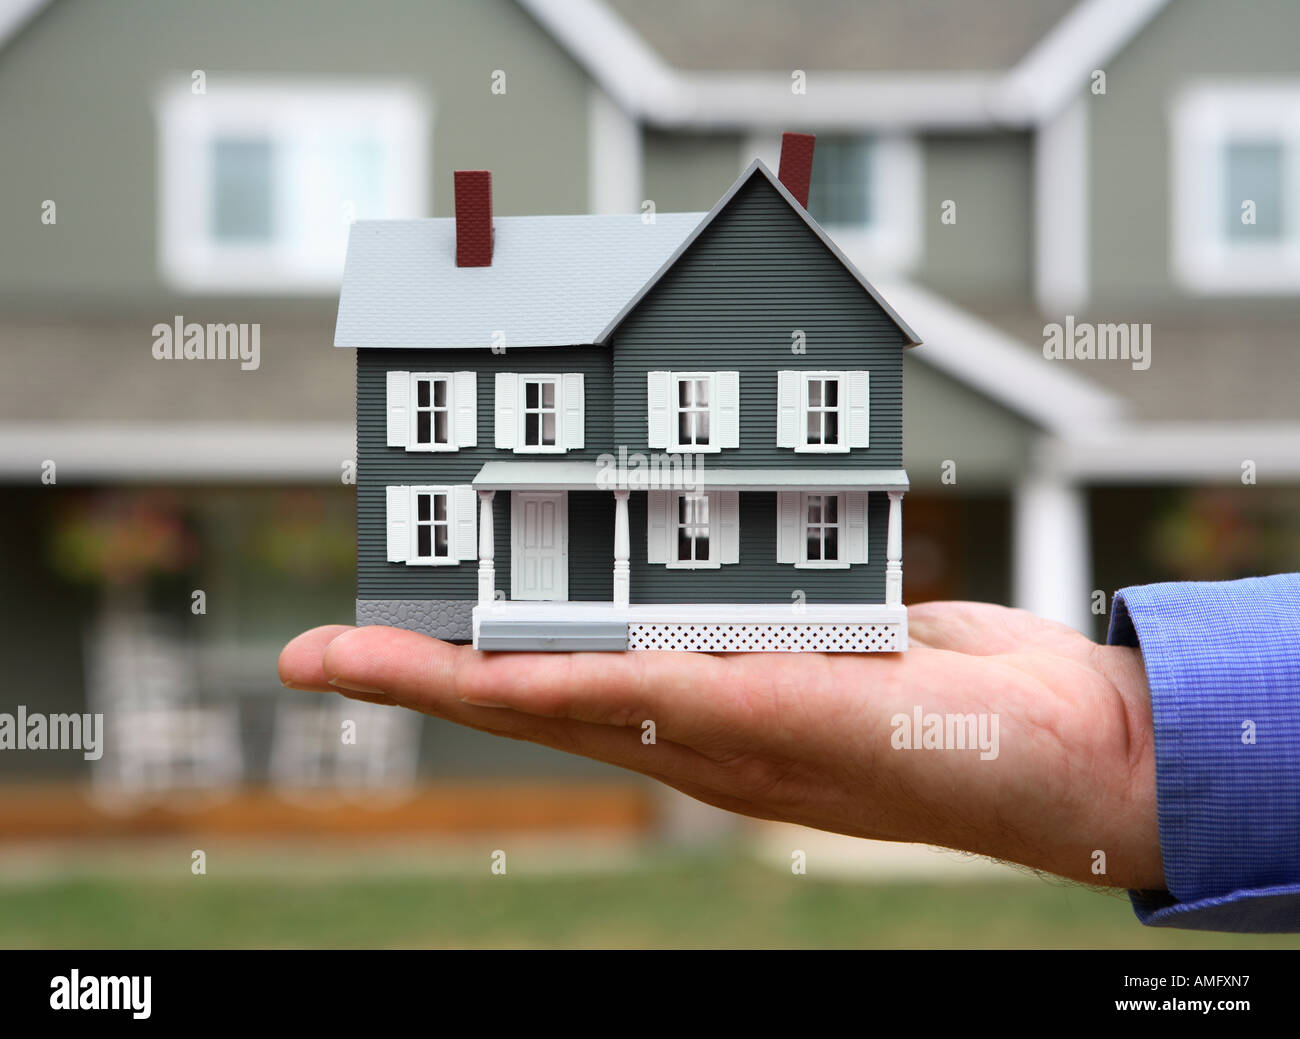 Hand Holding Model House in front of Full Size Home Stock Photo